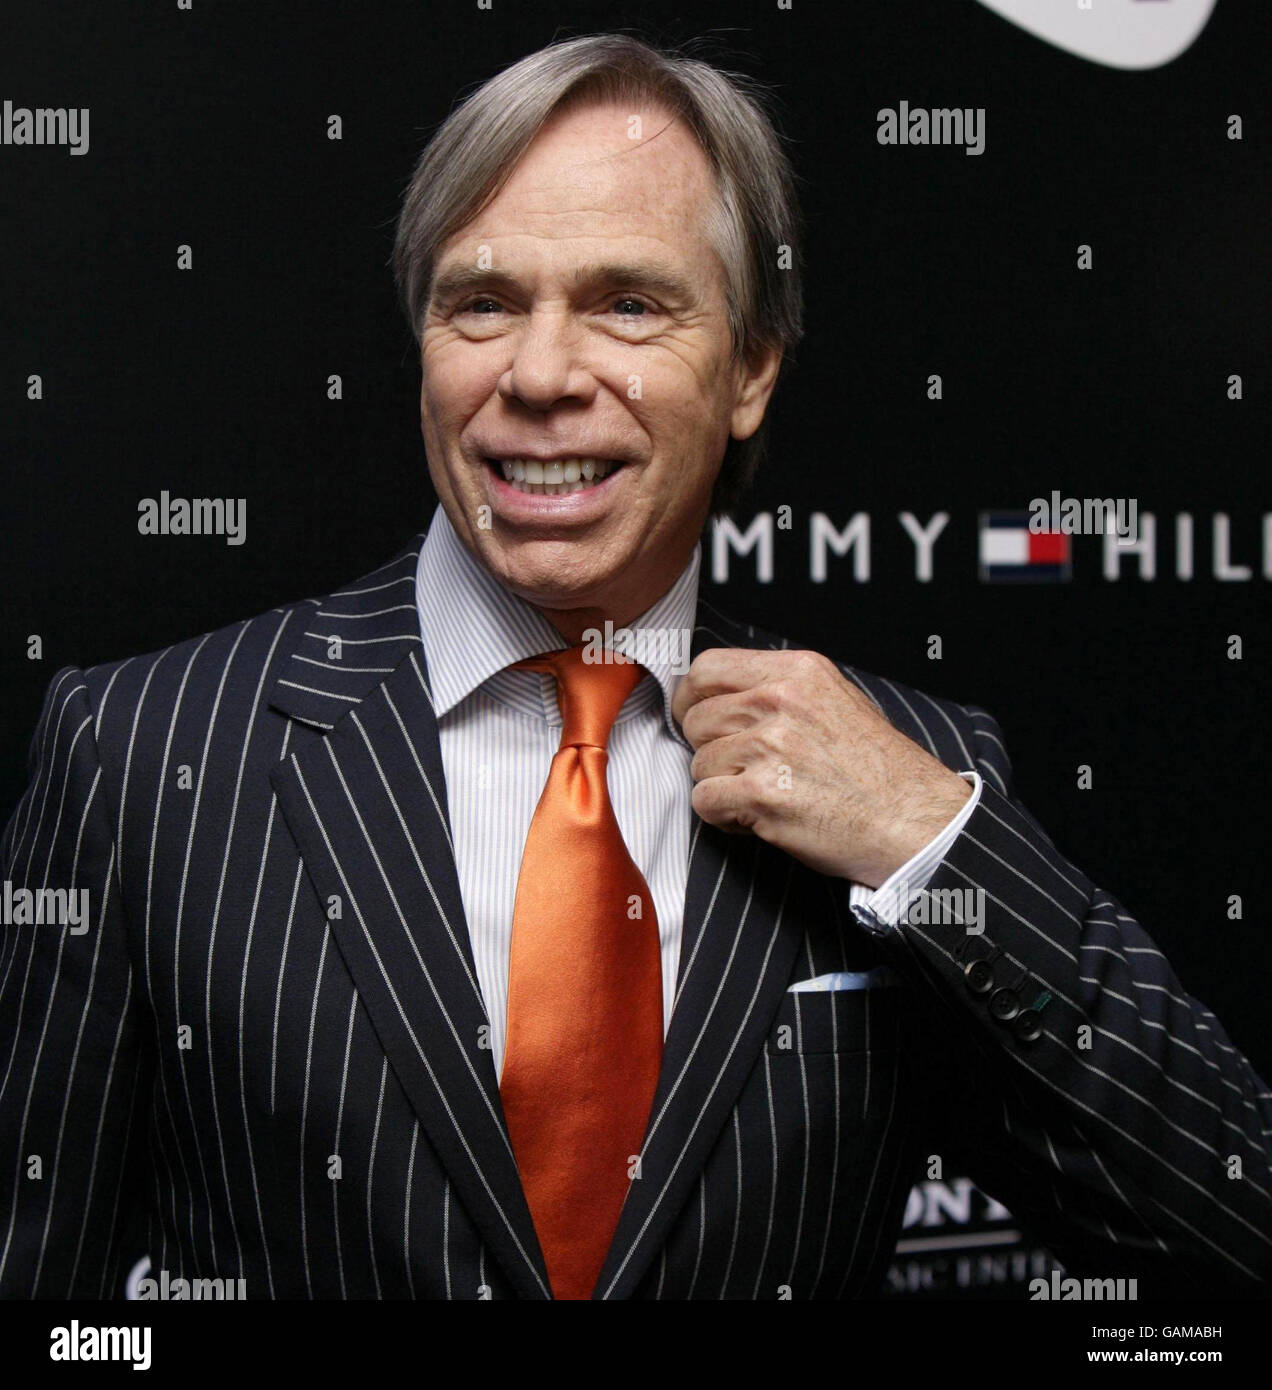 Fashion designer Tommy Hilfiger during press conference for the Hilfiger Sessions and Worldwide launch of Tommy TV in association with Sony BMG, at BAFTA in Piccadilly, central London Stock Photo -